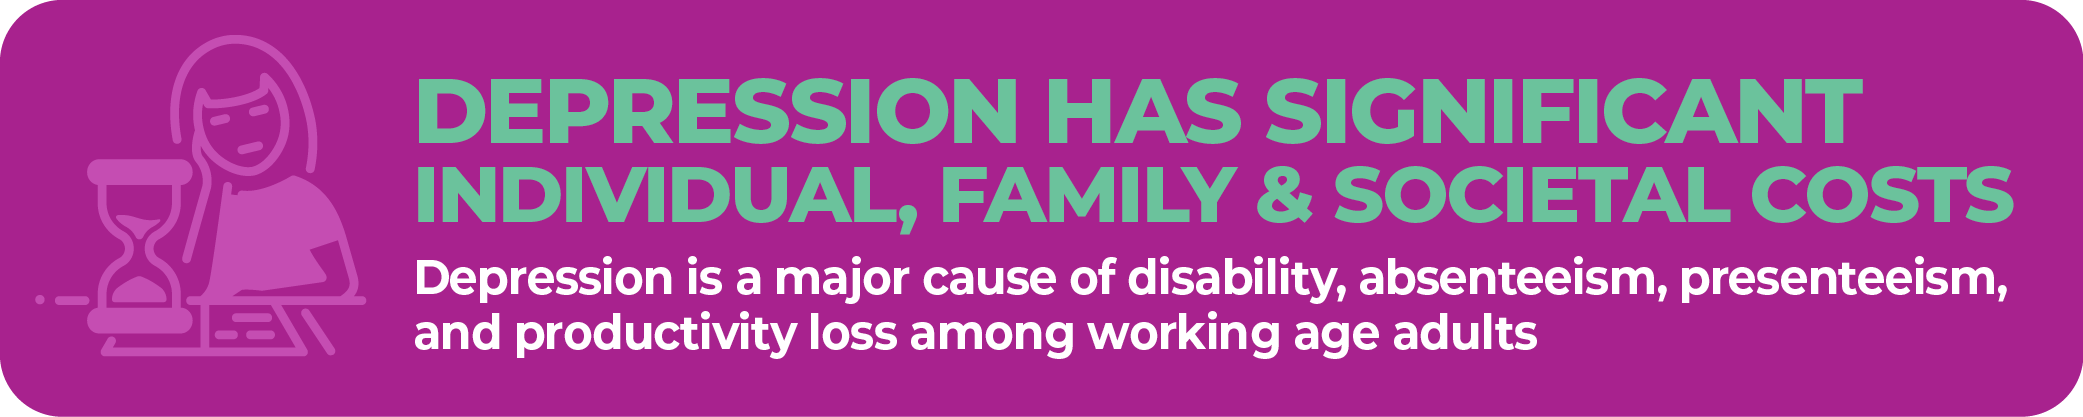 Depression has significant individual, family & societal costs. Depression is a major cause of disability, absenteeism, presenteeism, and productivity loss among working age adults.